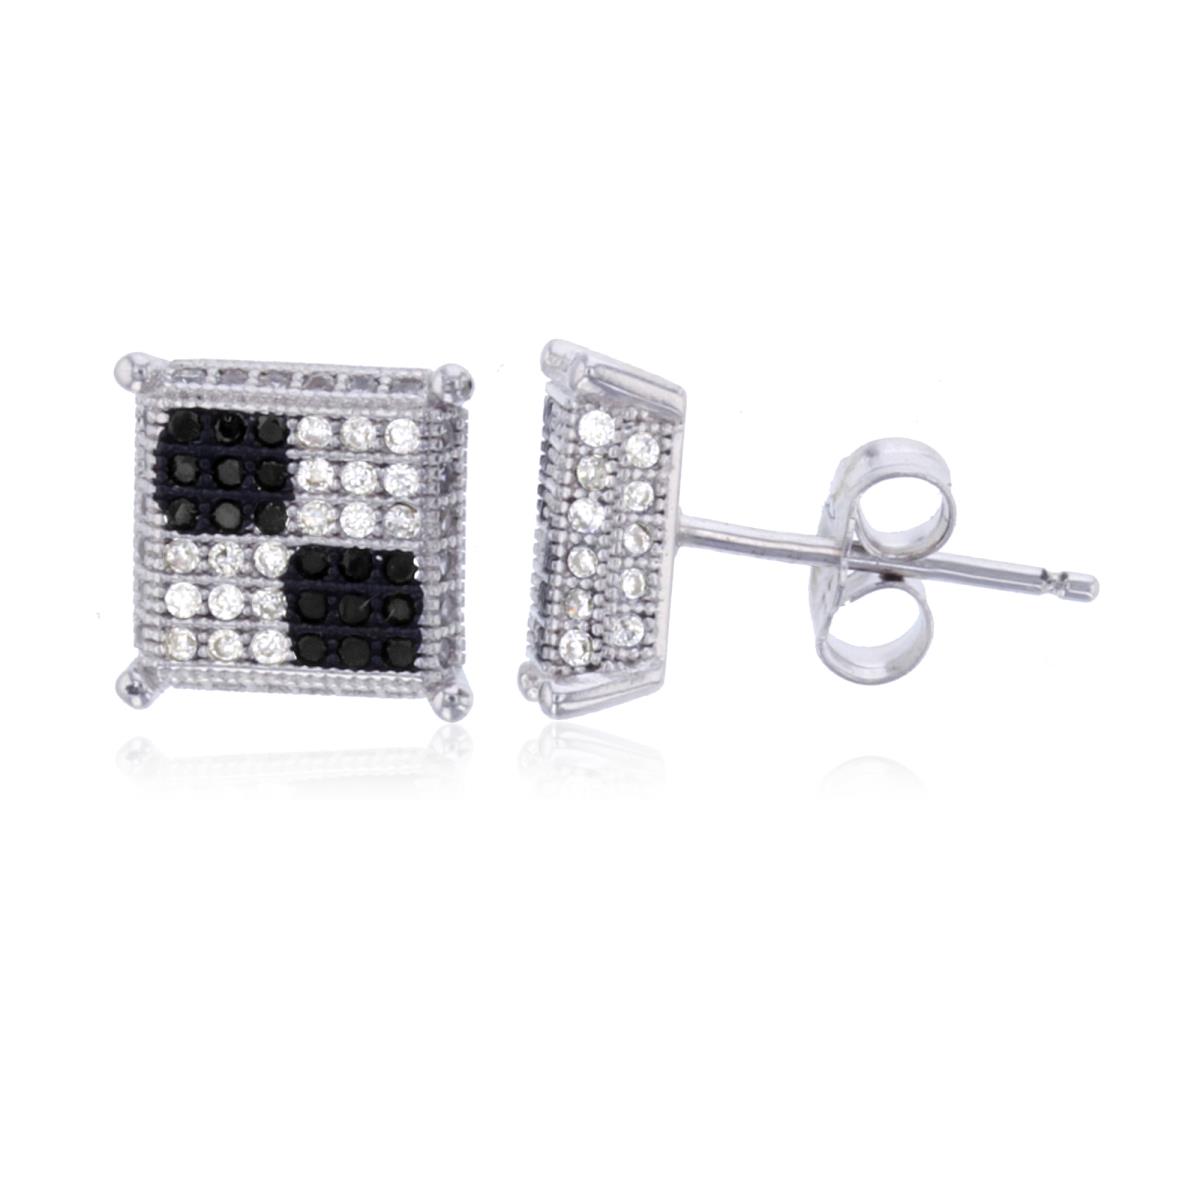 Sterling Silver Black & White 10.3x10.3mm Checkered Micropave Square Stud Earring